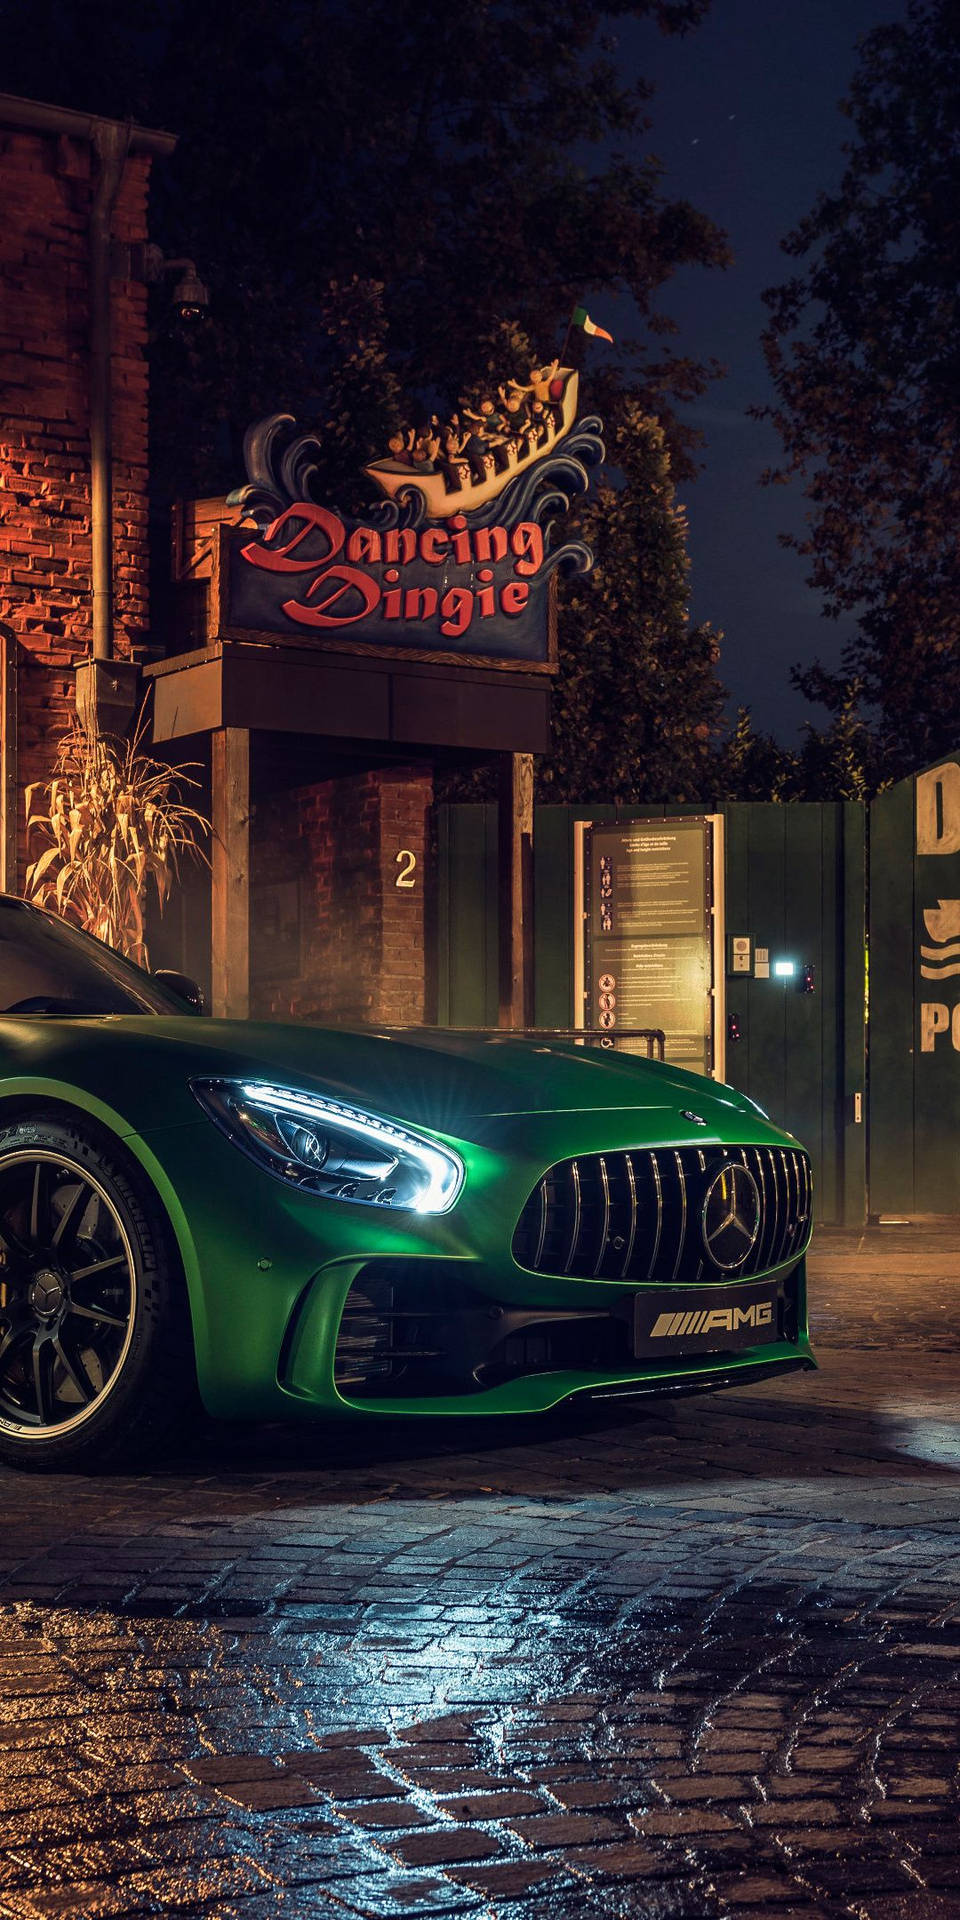 Green AMG Parked Outside Dancing Dingie Wallpaper